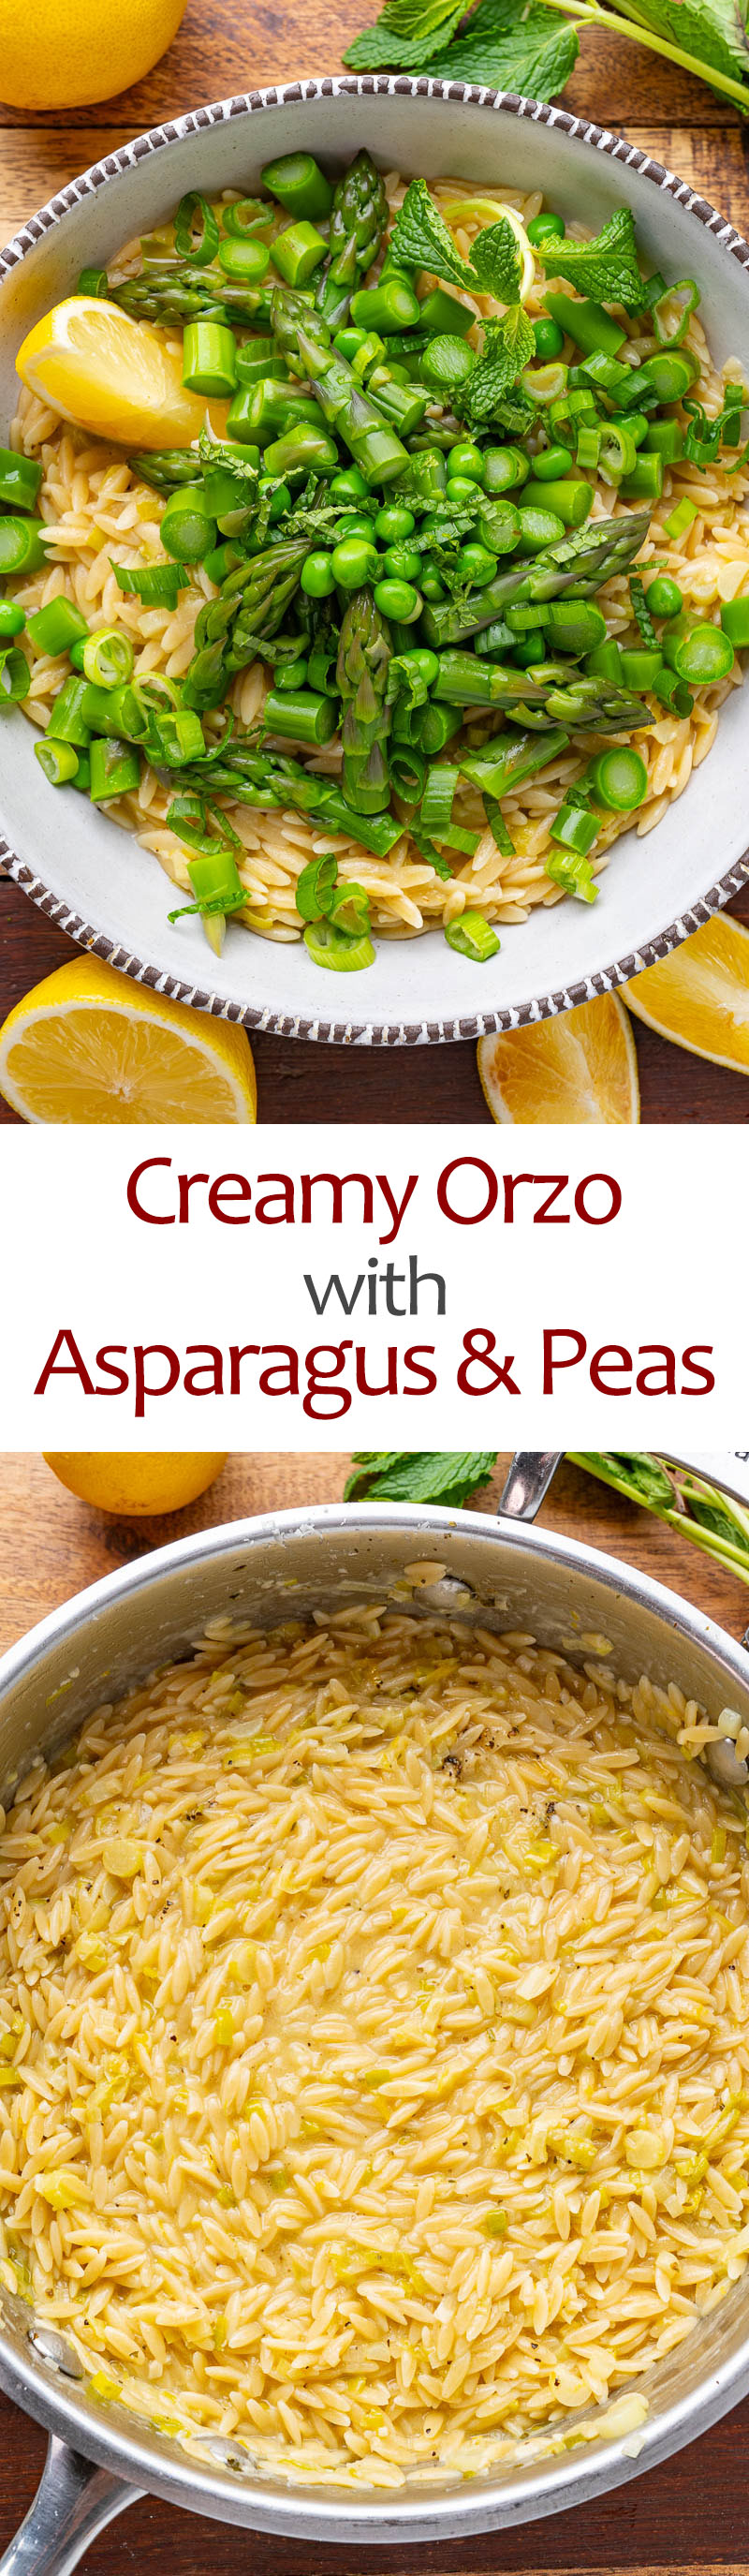 Creamy Orzo with Asparagus and Peas